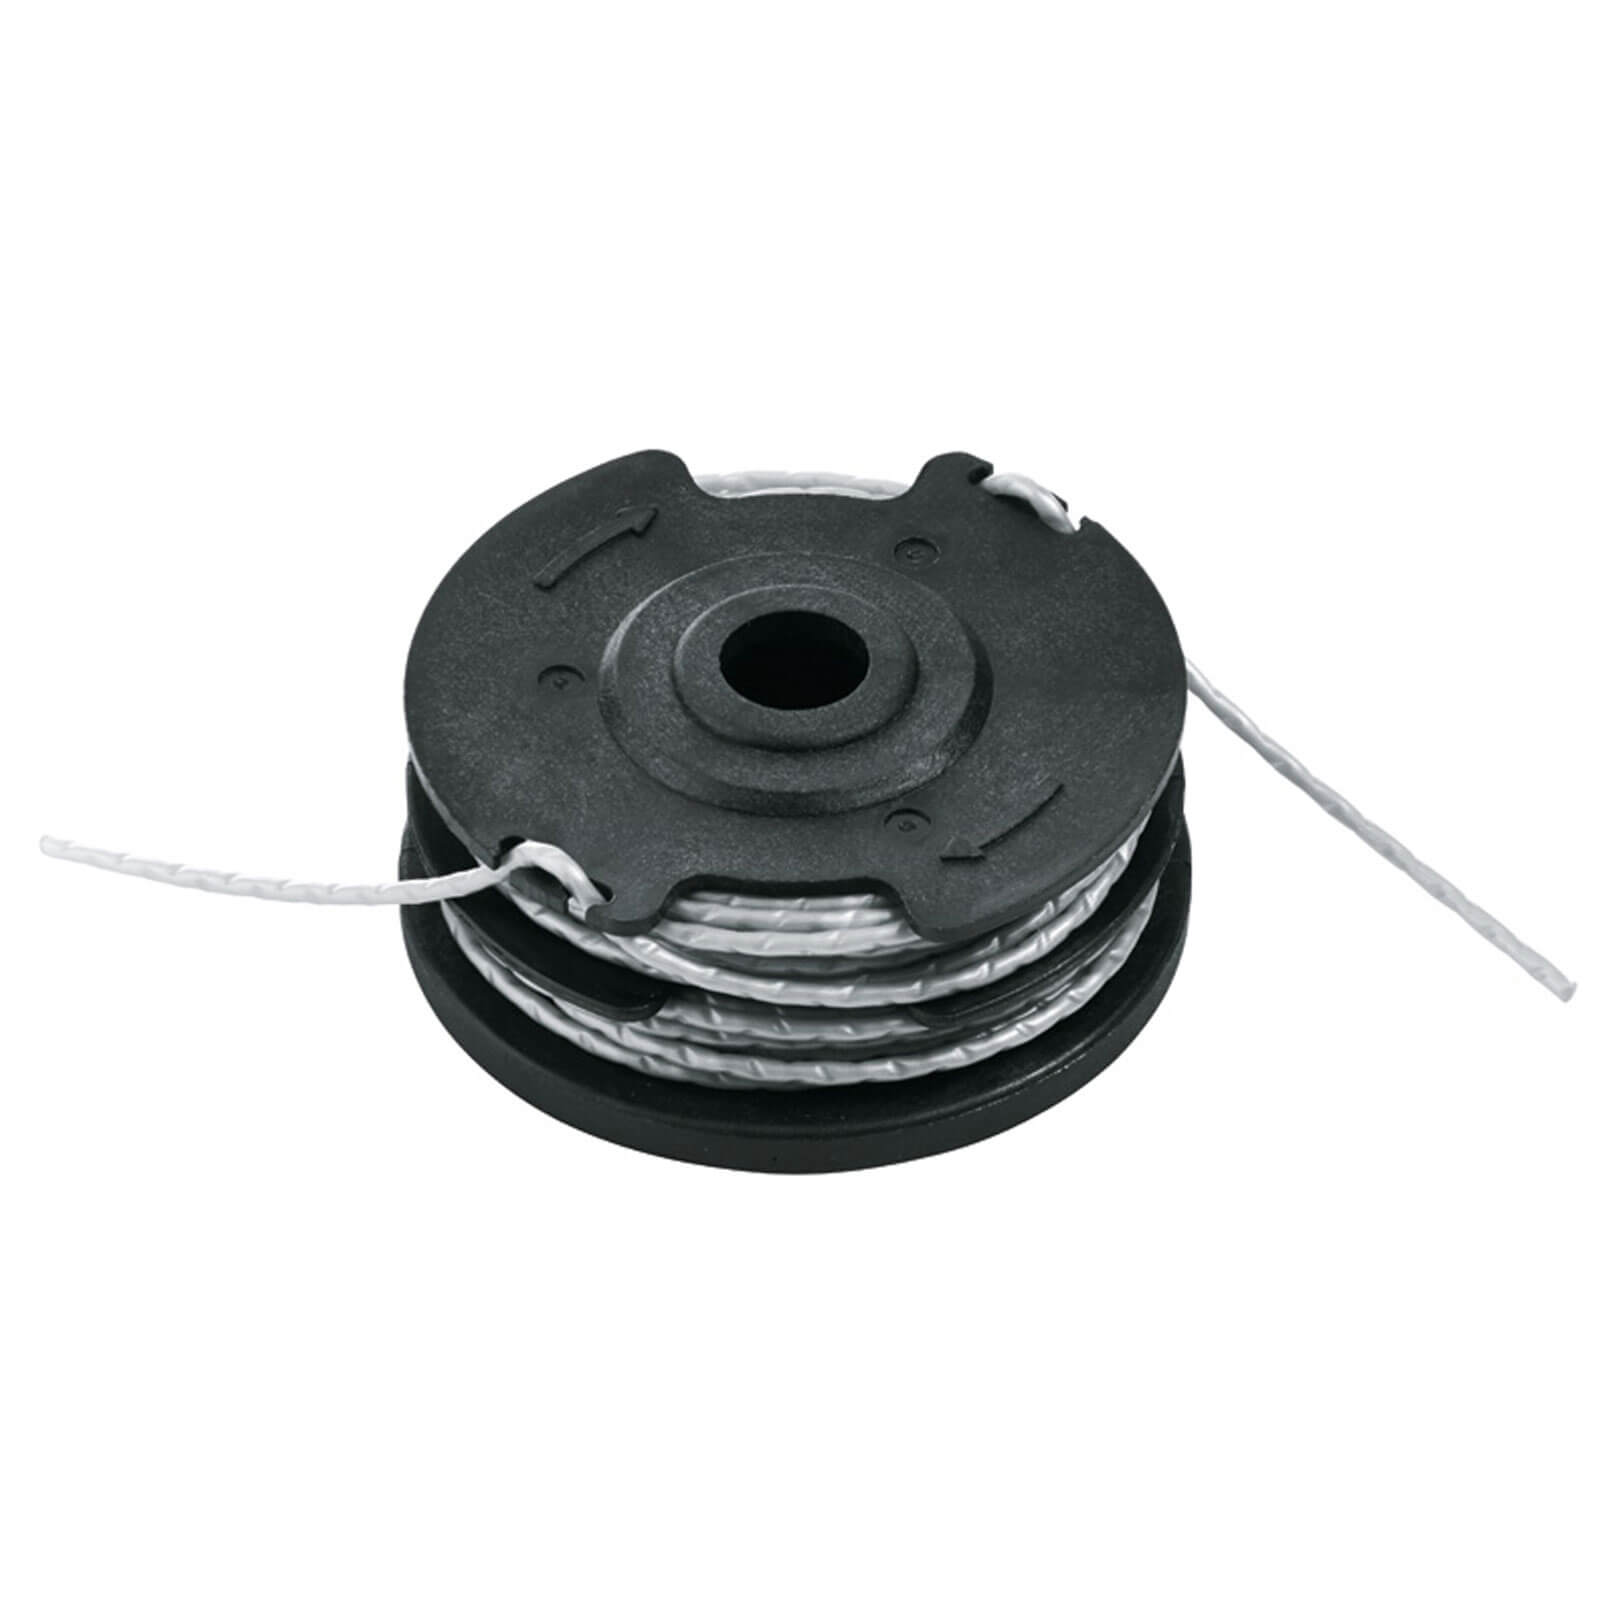 Image of Bosch Genuine Spool and Line for ART 35 Grass Trimmers Pack of 1